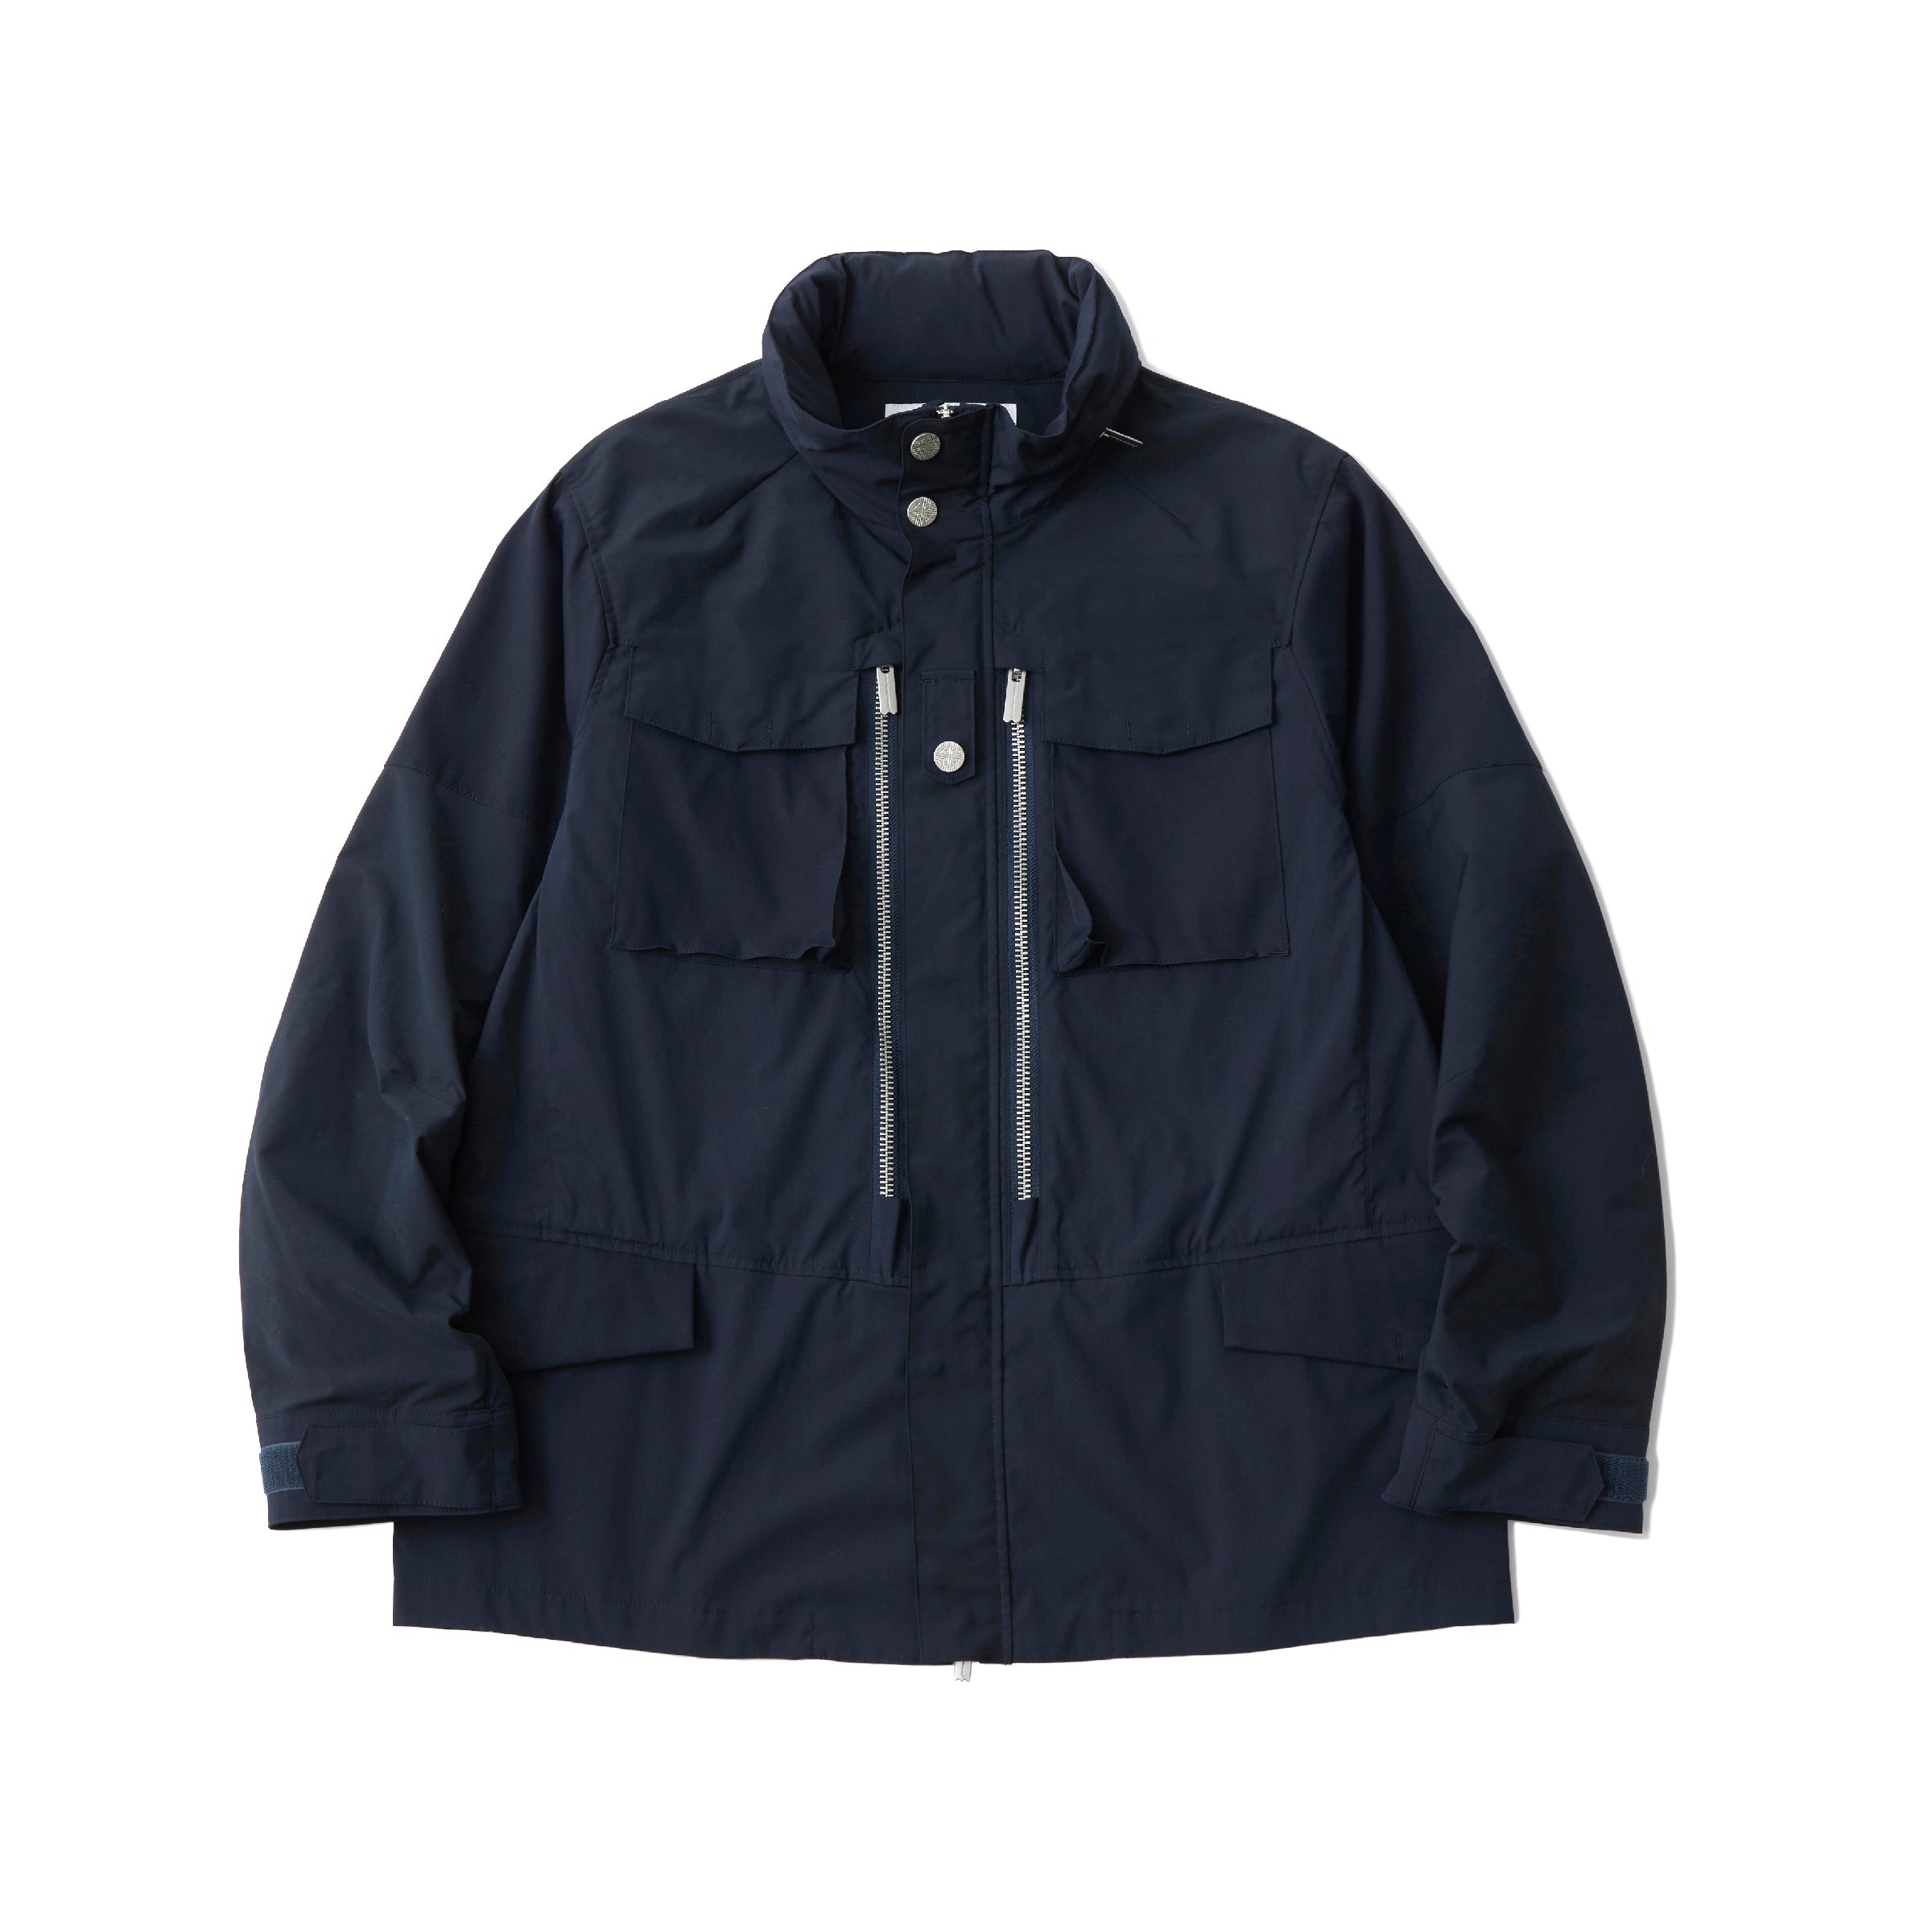 TECH WEATHER FIELD JACKET – White Mountaineering OFFICIAL WEB SITE.